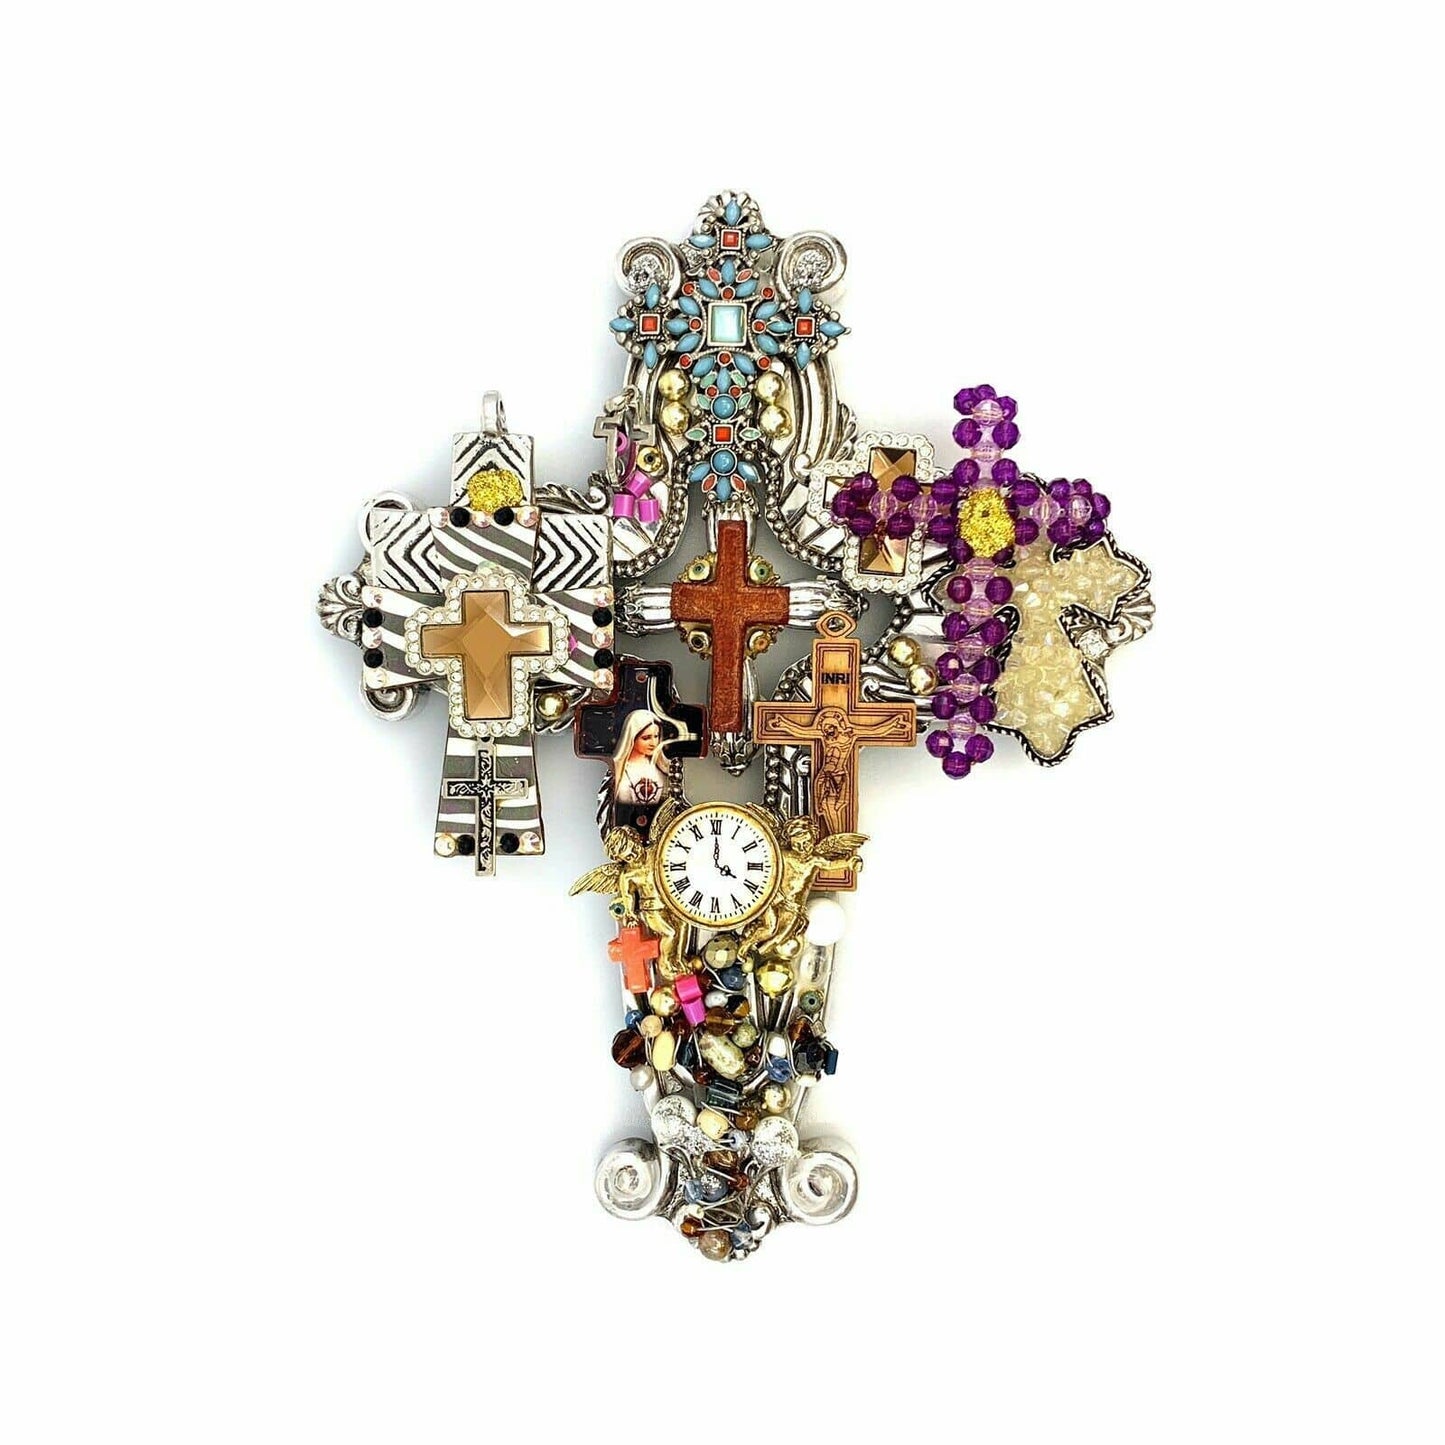 Vintage Silver Cross Wall Decoration Costume Jewelry Art Grace Large 10"